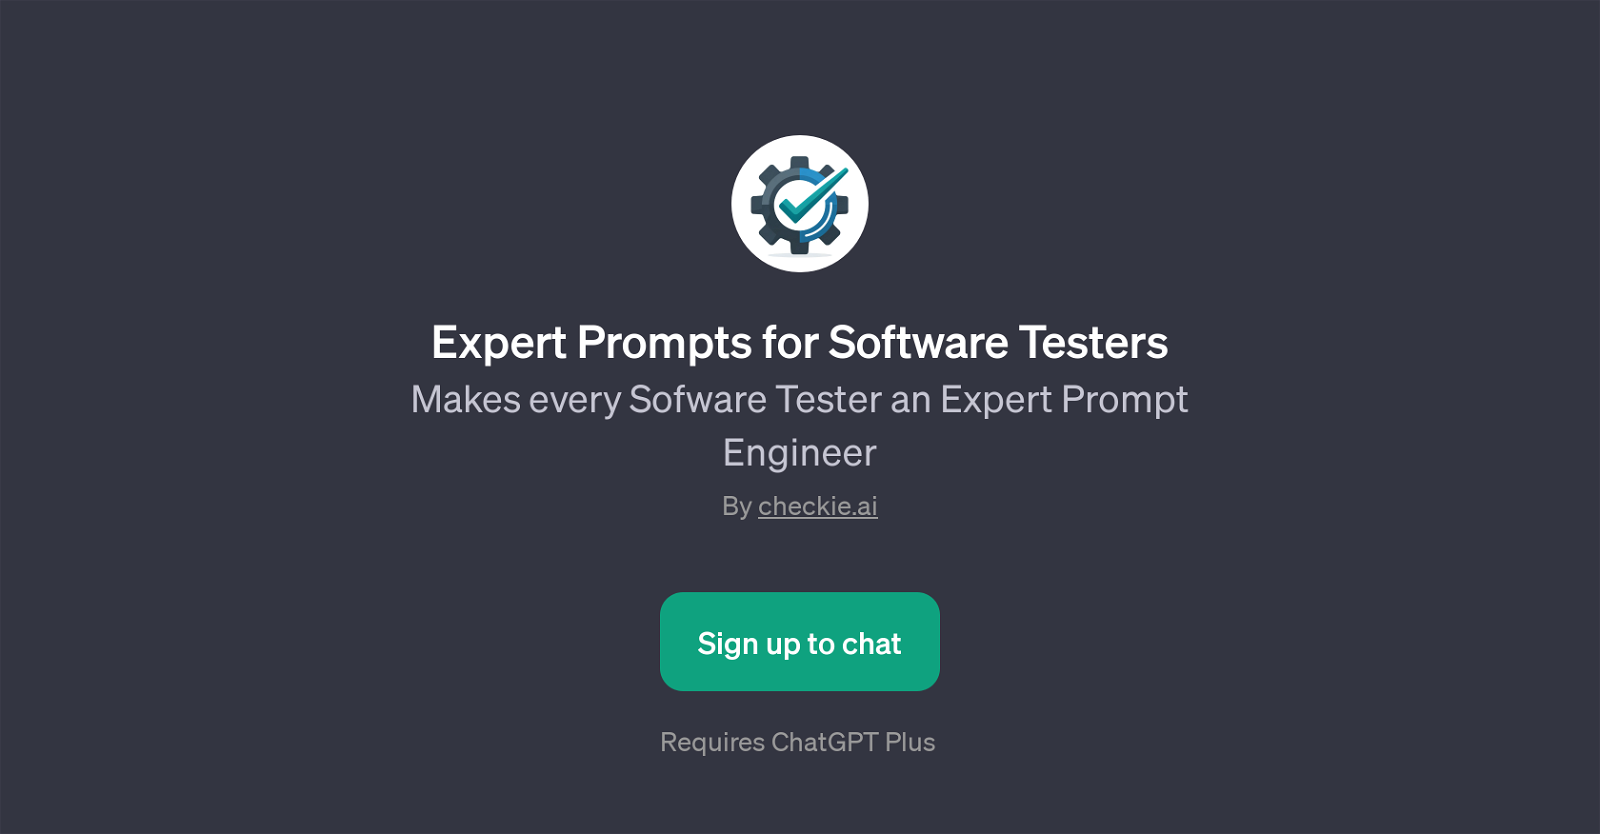 Expert Prompts for Software Testers website